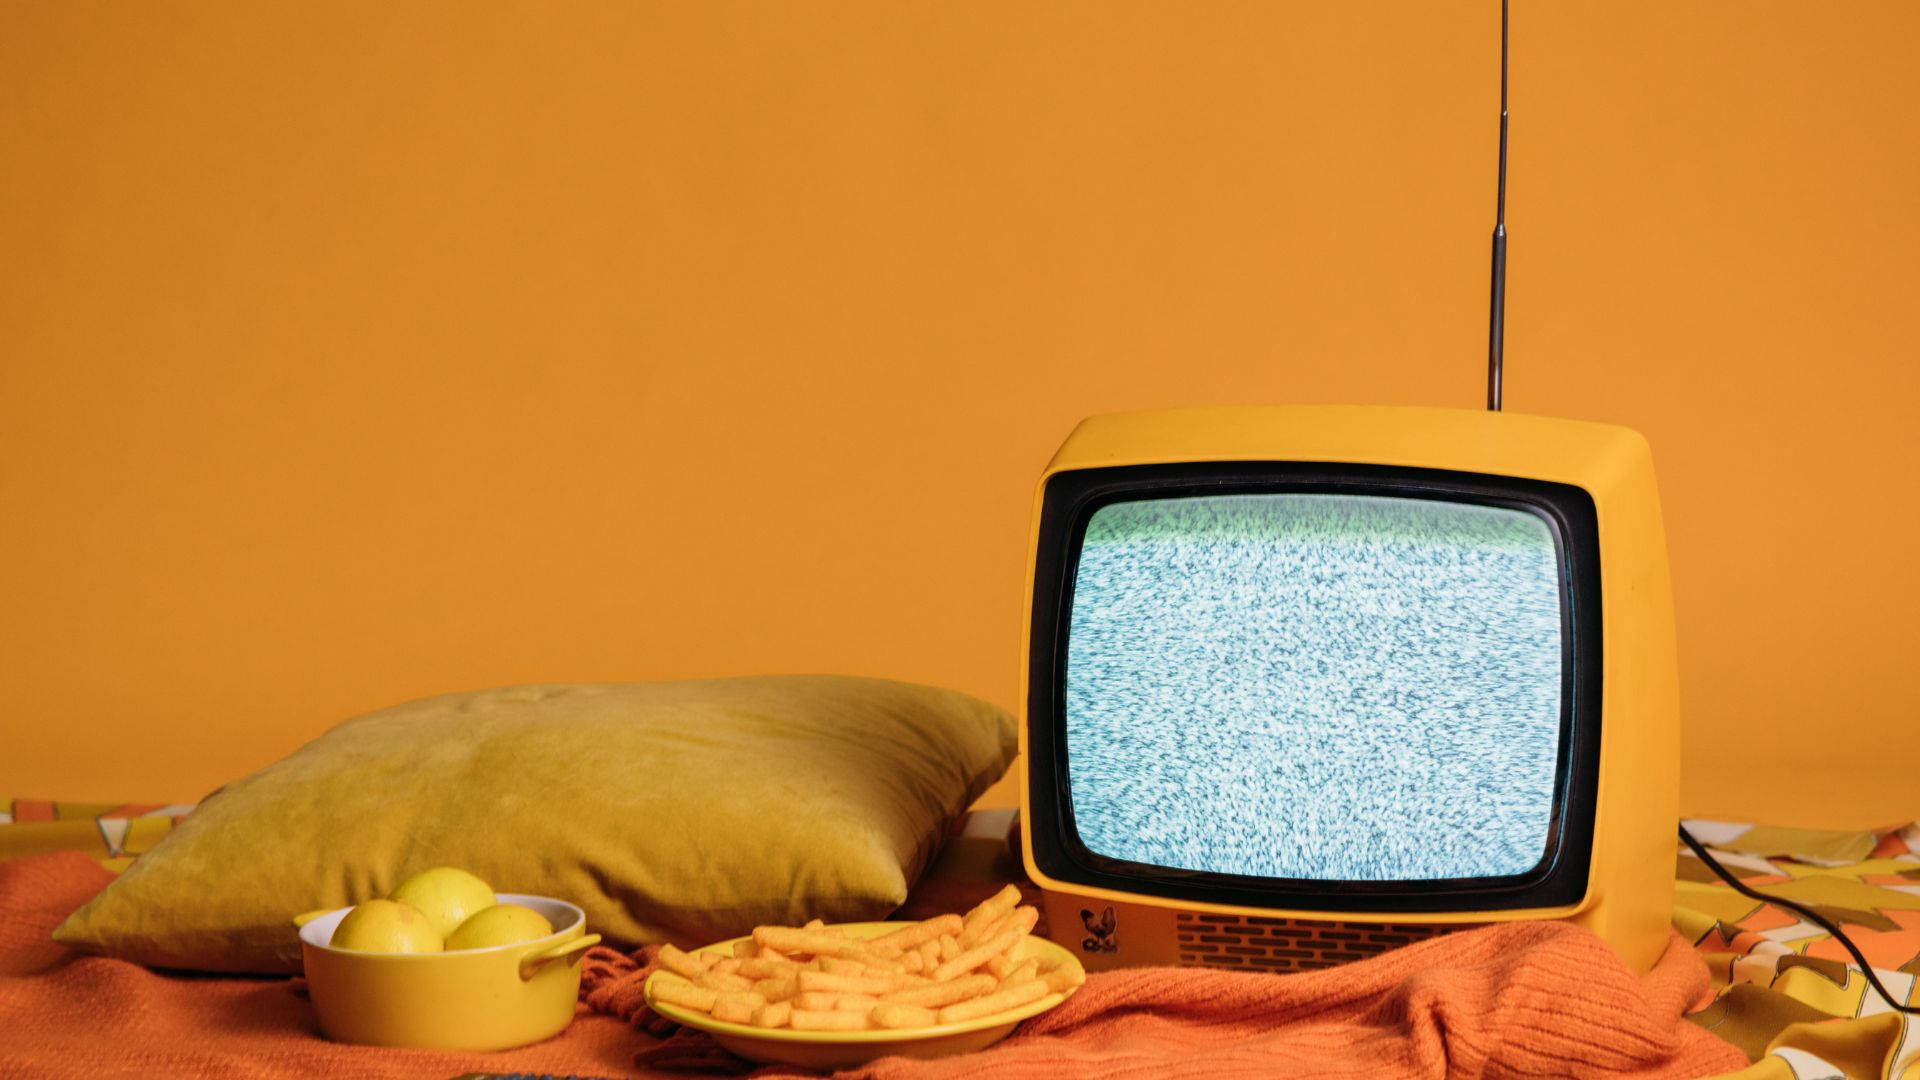 Old Analogue TV Appliance Wallpaper